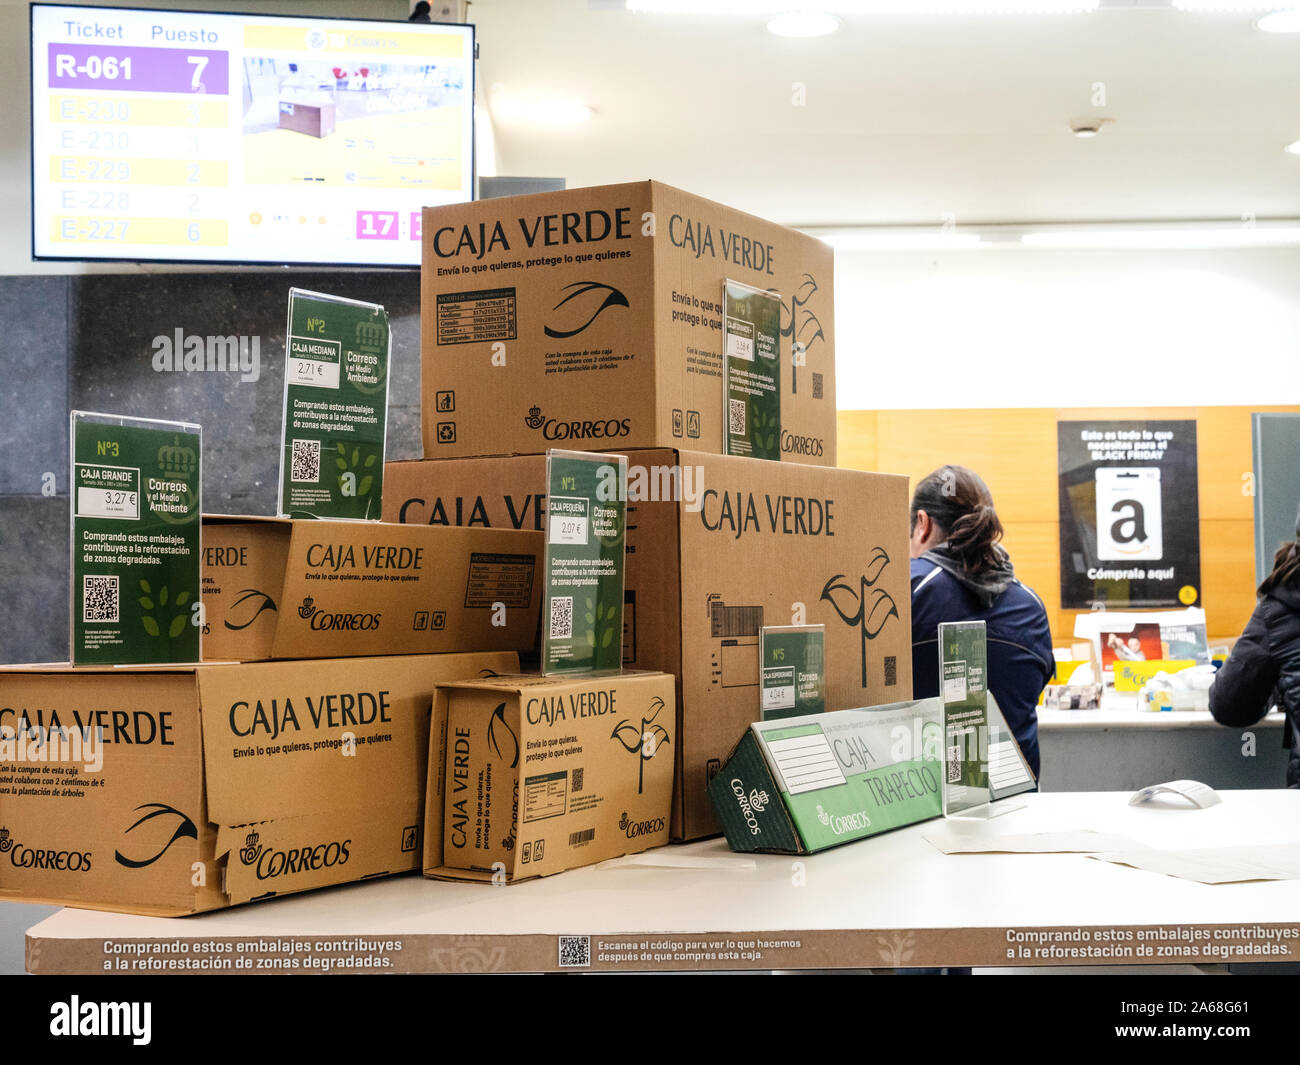 Barcelona, Spain - Nov 17, 2017: Caja Verde special packages by the Spanish  postal operator Correos for sale in local Postal office with works in  background and Amazon Black Friday posters Stock Photo - Alamy